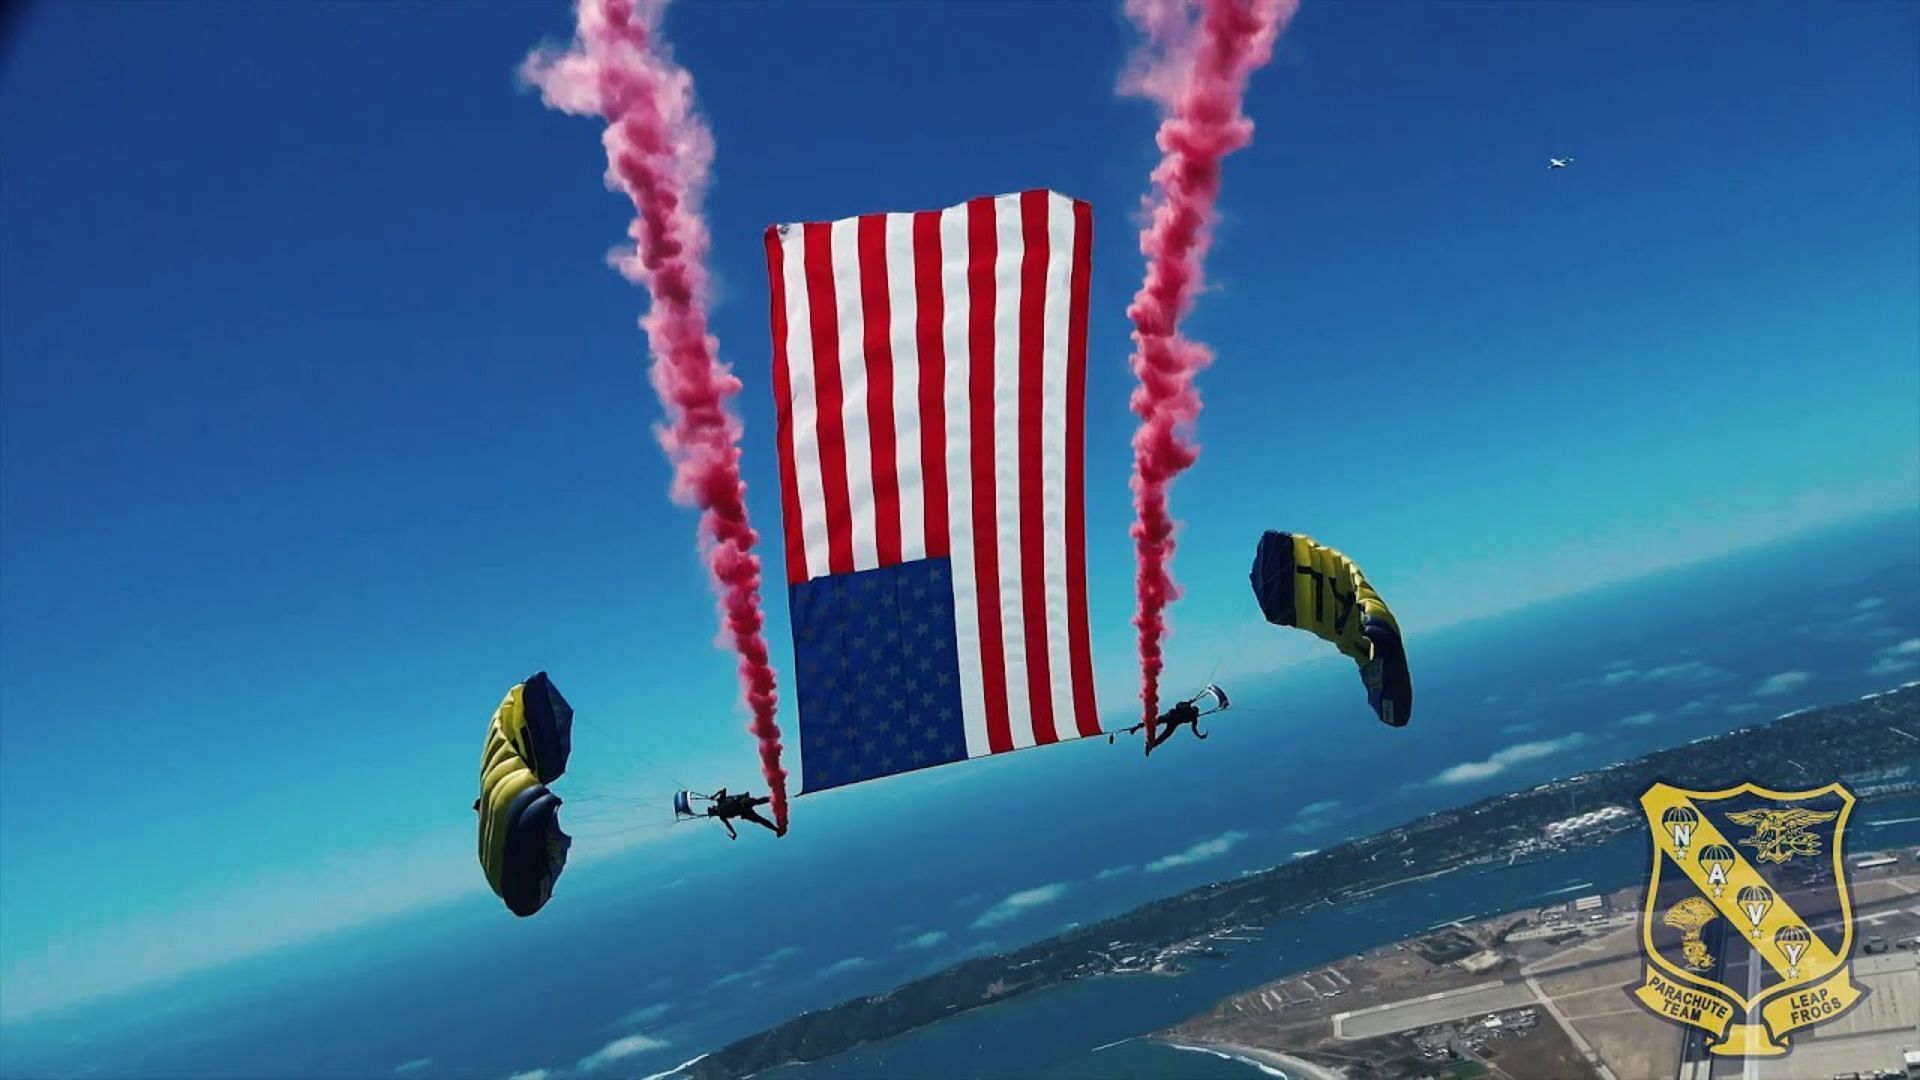 Who are the Leap Frogs? Duluth airshow parachute accident prompts